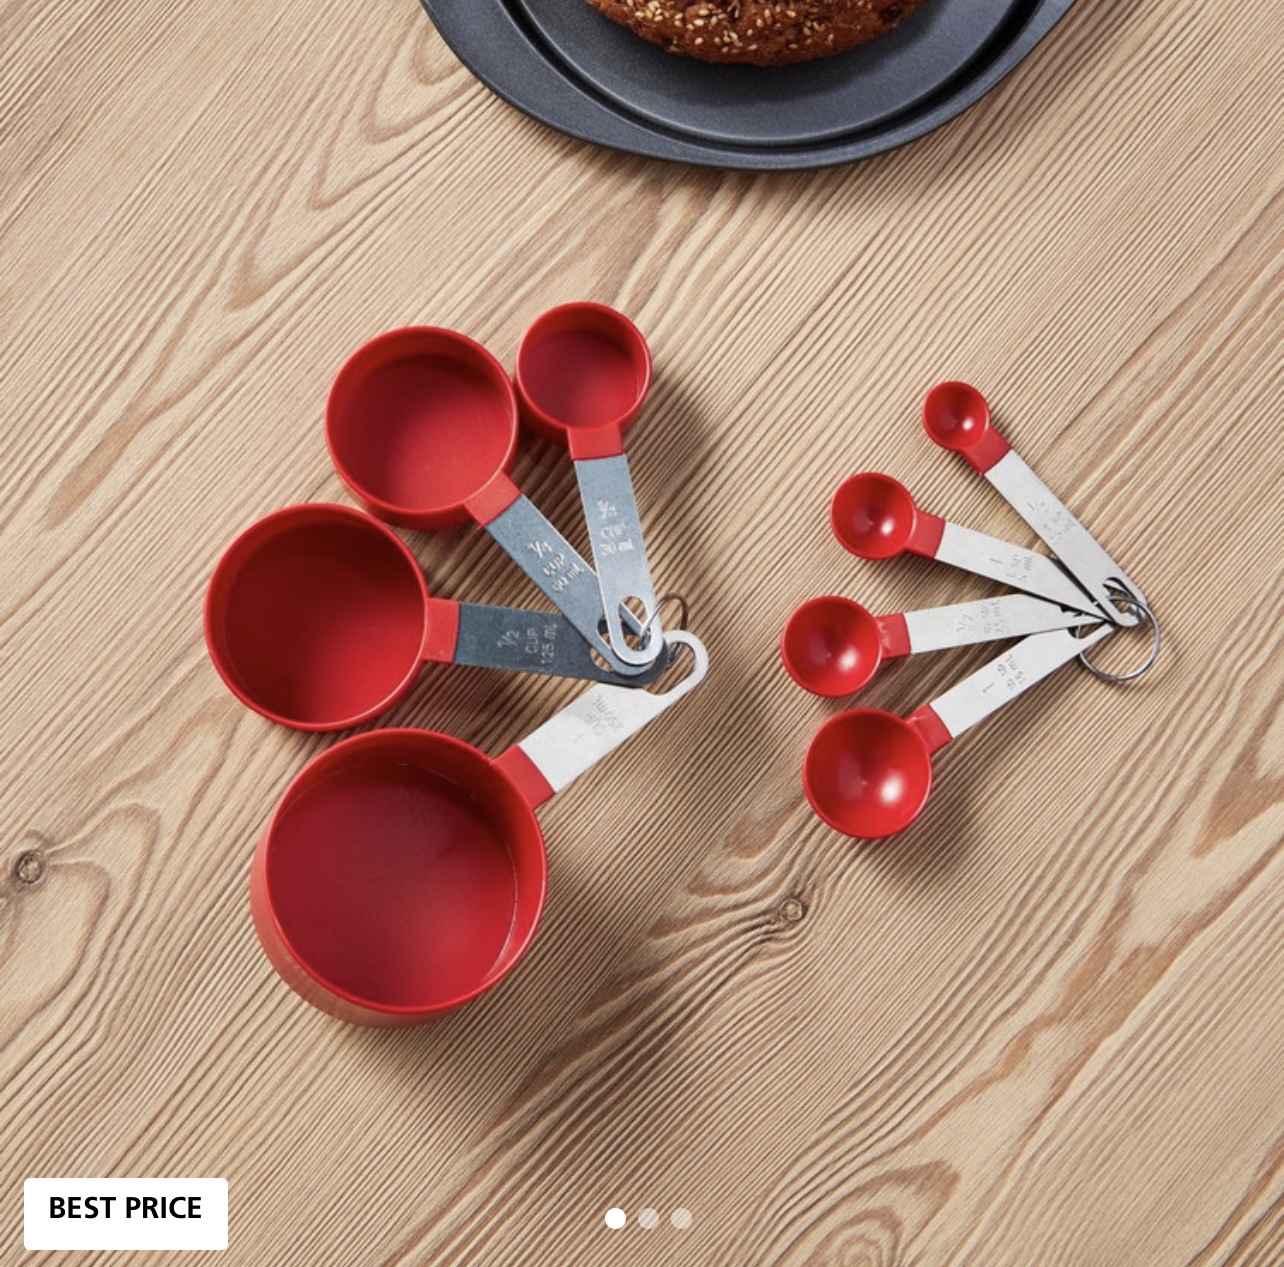 Best Measuring Spoons in 2022 Review 